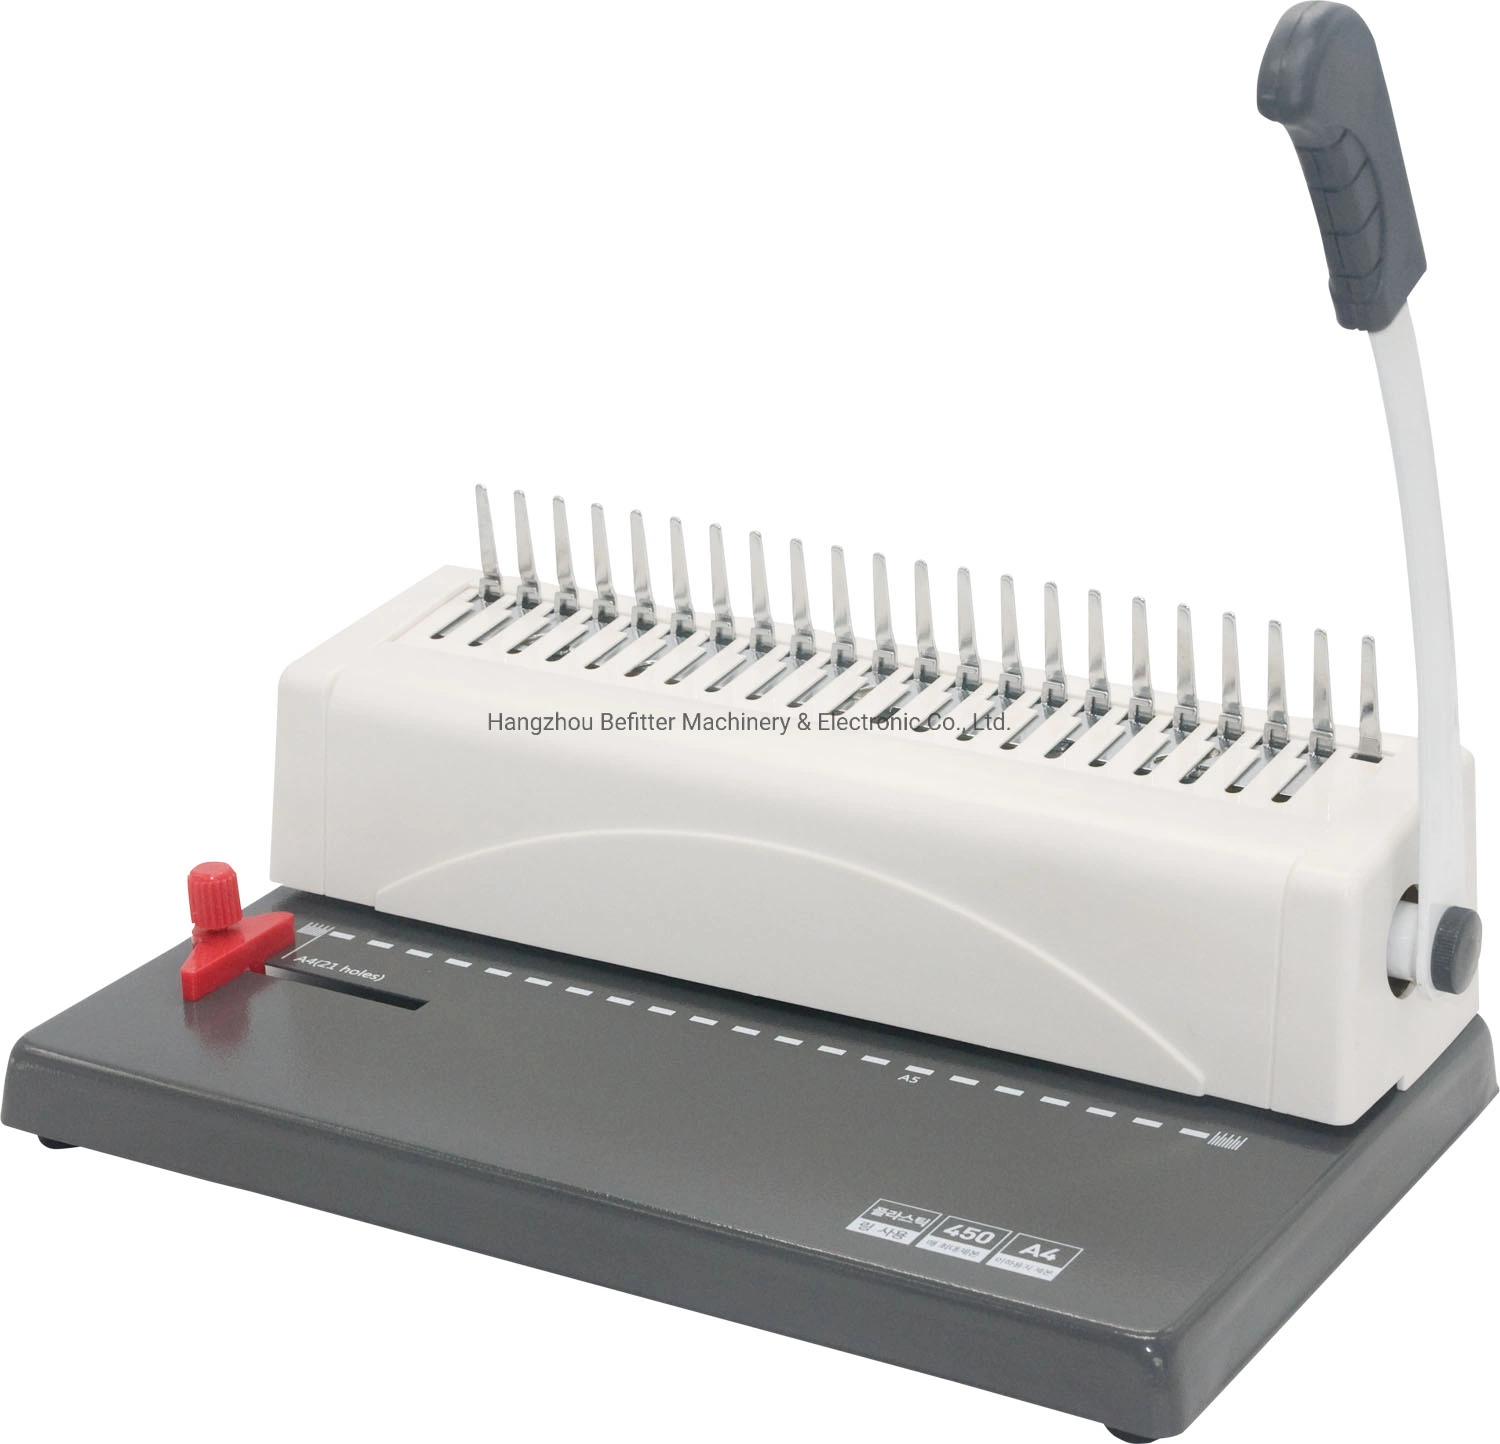 12 Sheets Manual Small Comb Binding Machine For Office